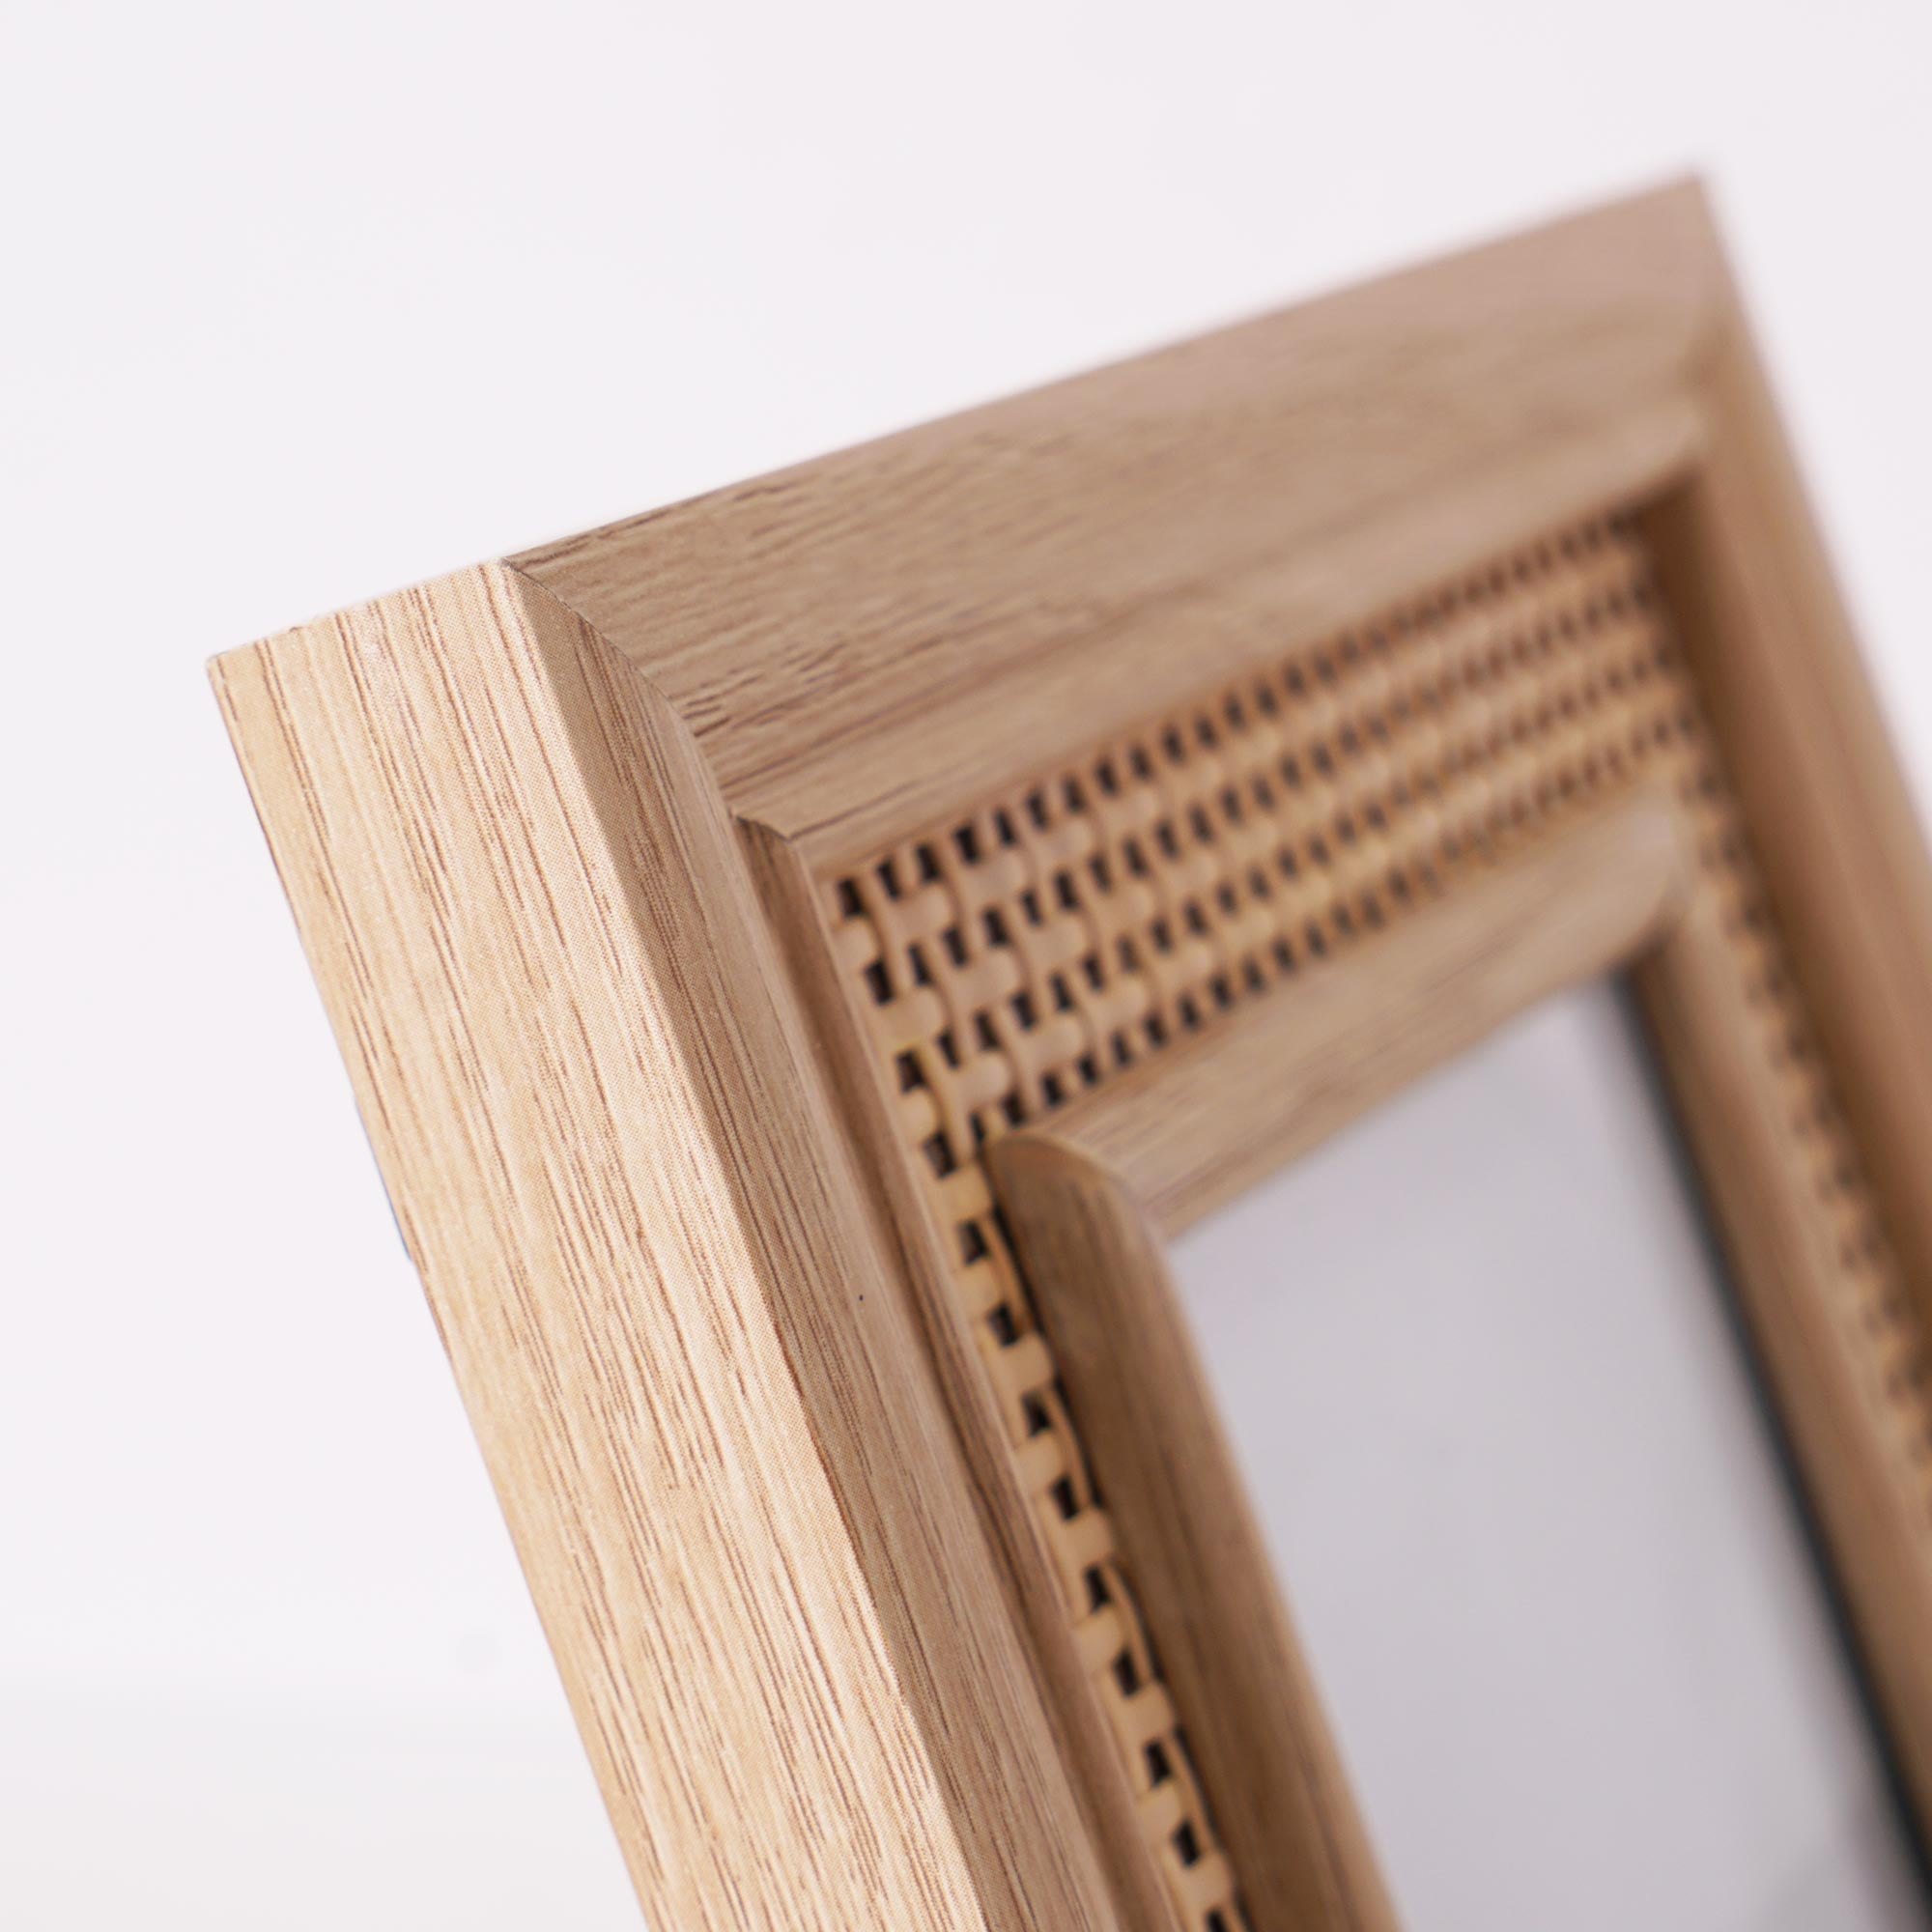 4×6 Woven Rattan Picture Frame